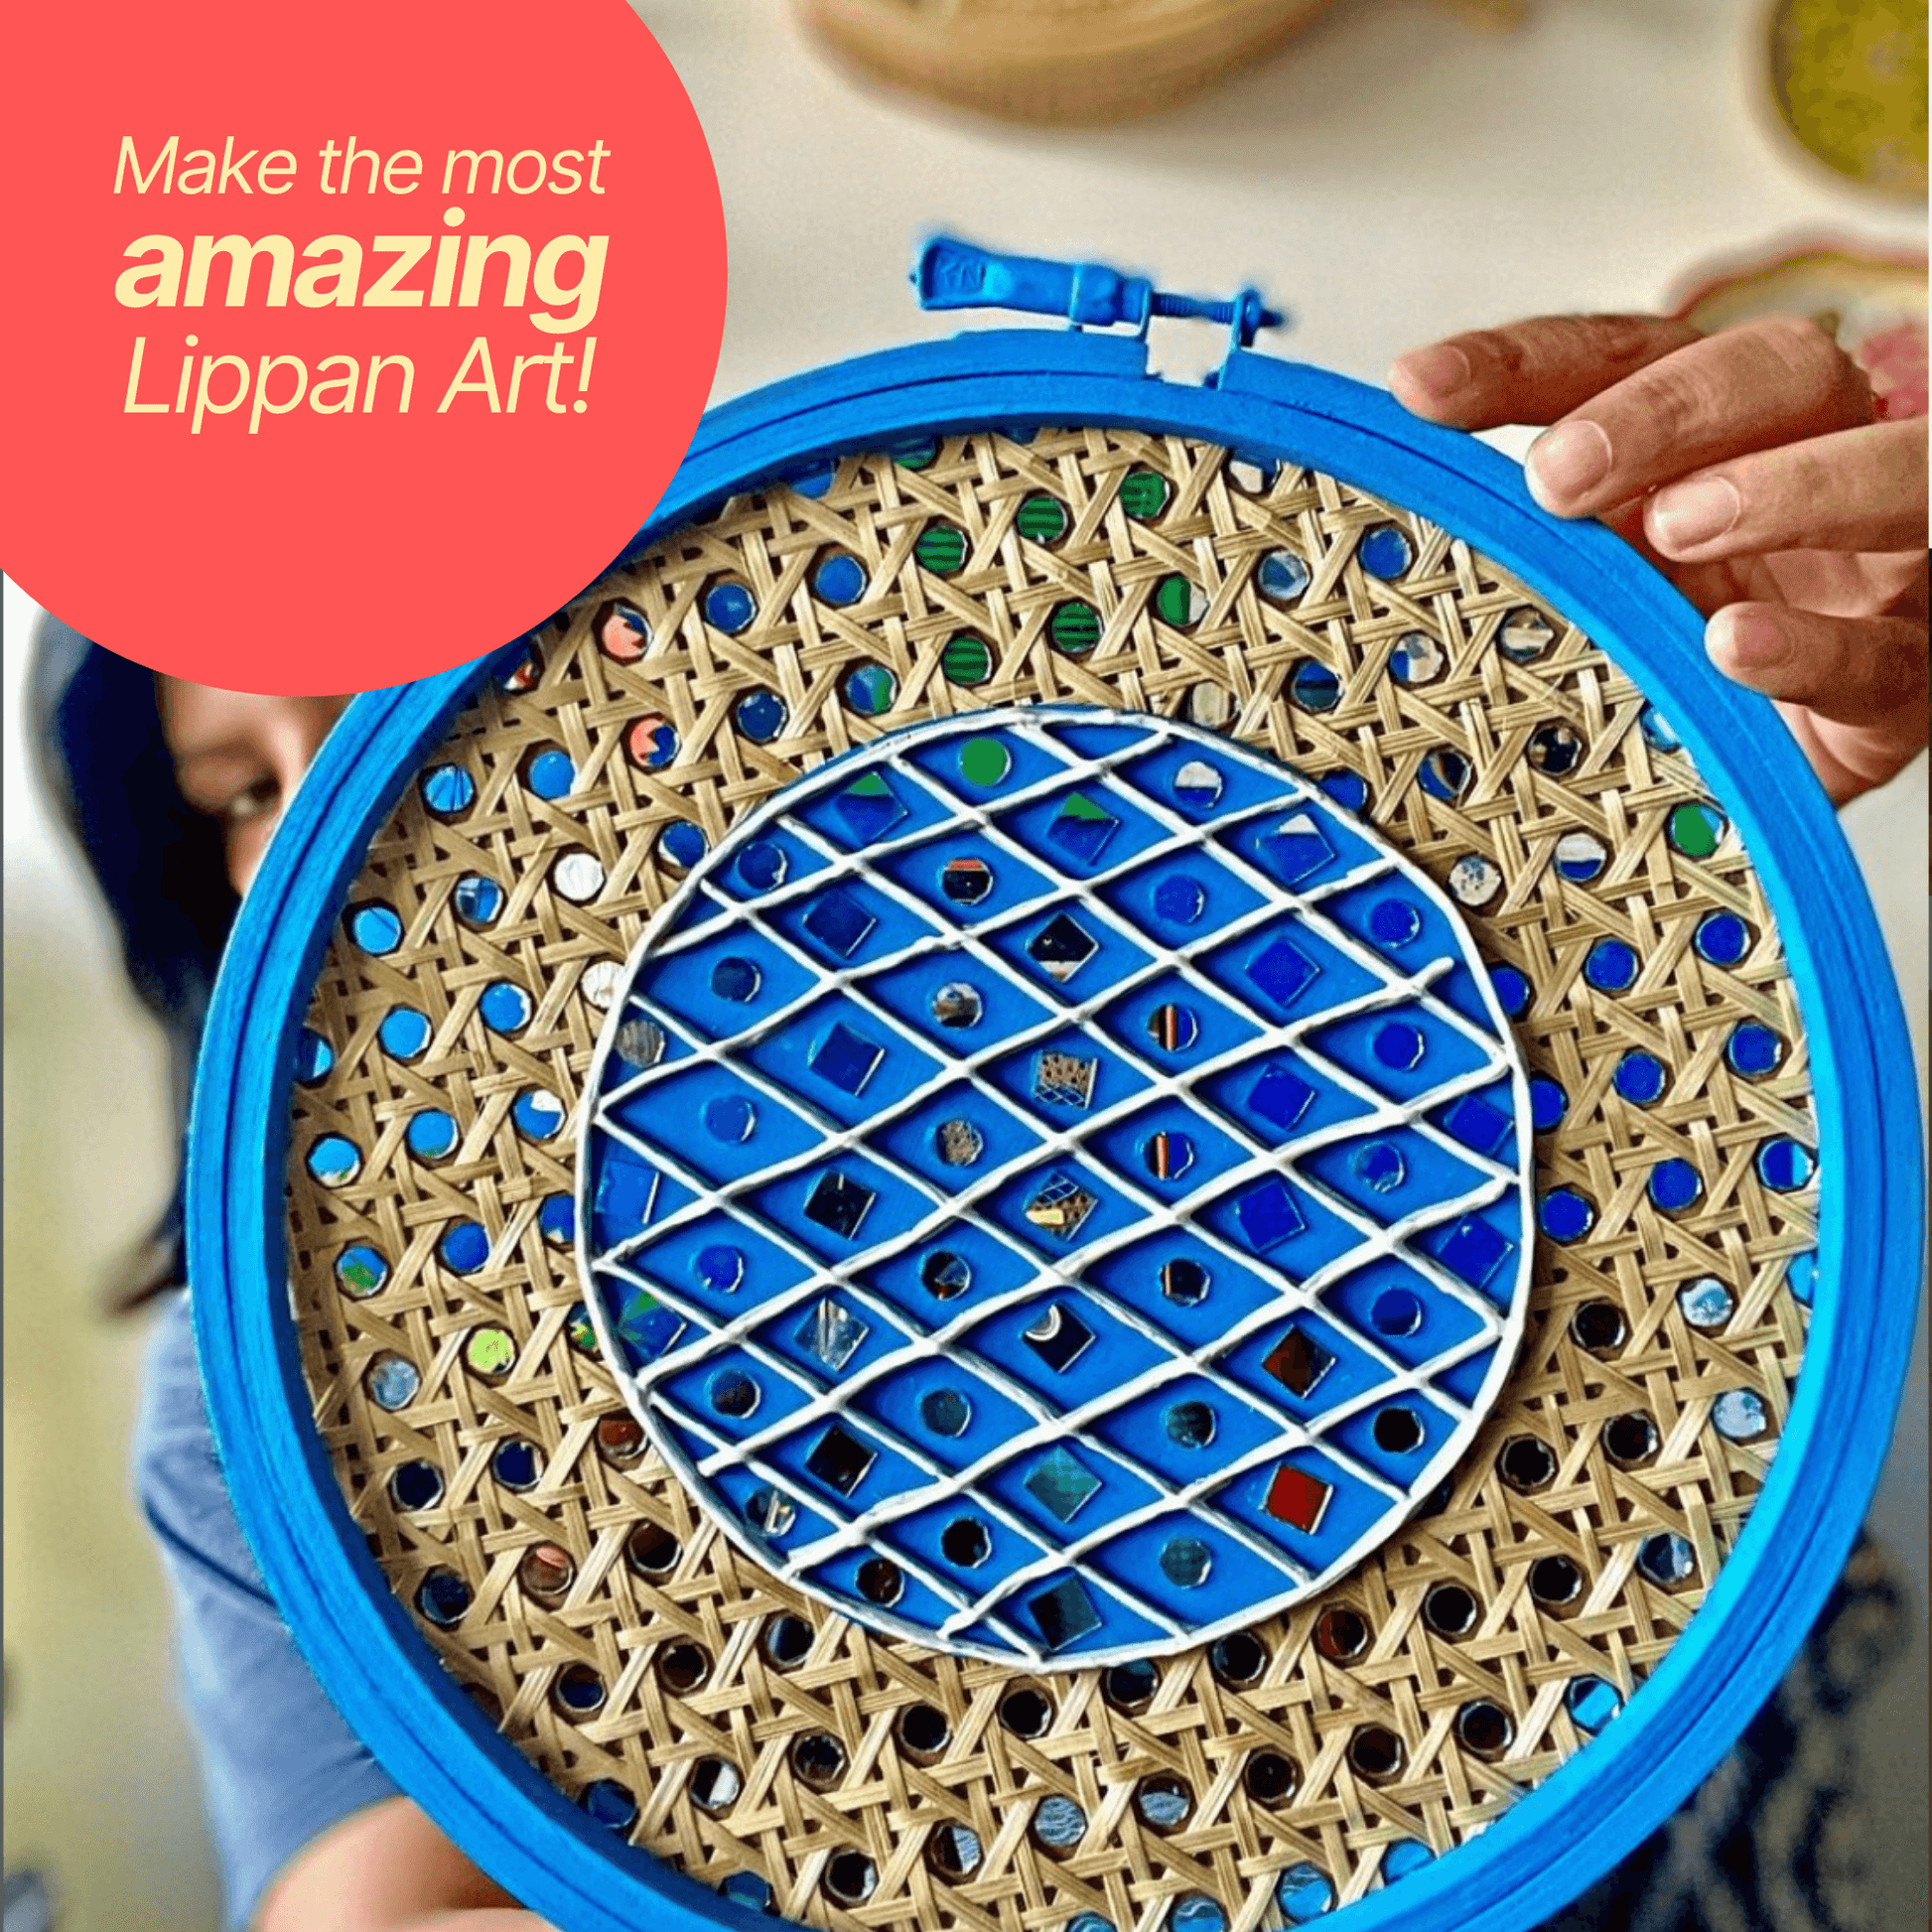 How to Make Lippan Art with Mirrors: A Step-by-Step Guide